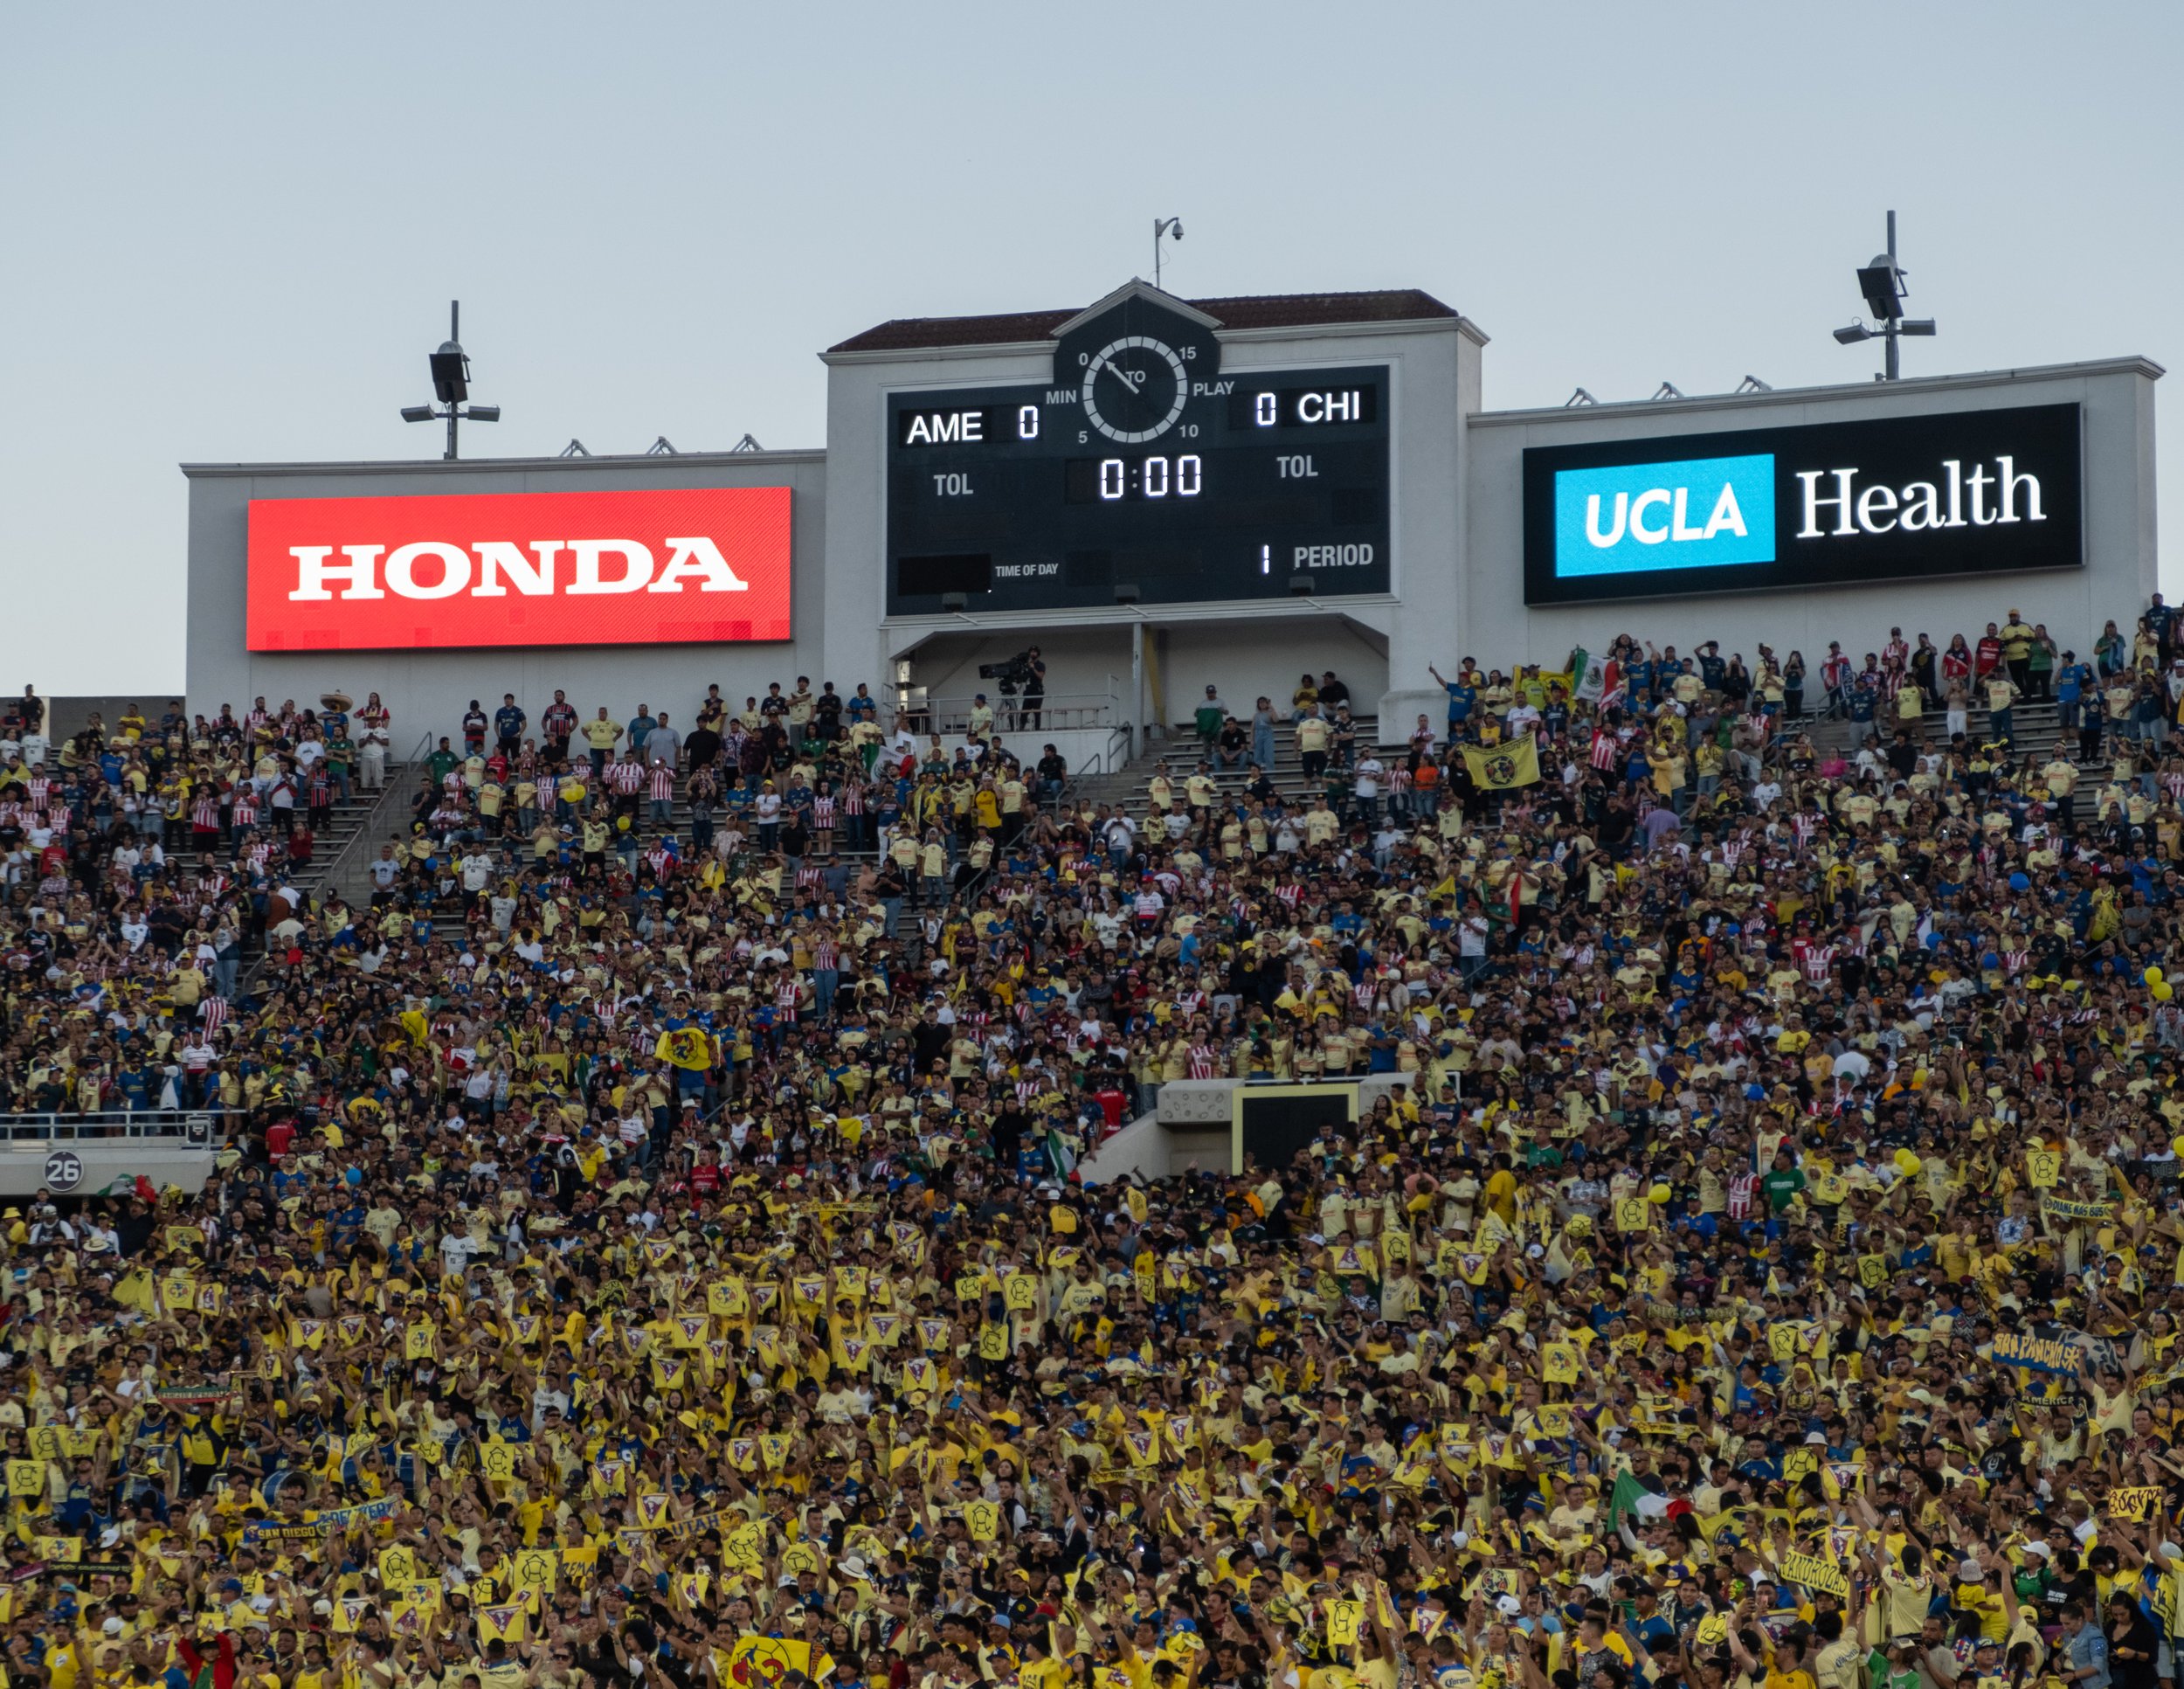  Club America fans crowding the bottom half of the stadium at the Rose Bowl in Pasadena, Calif. on Sunday, Oct. 15. (Danilo Perez | The Corsair) 